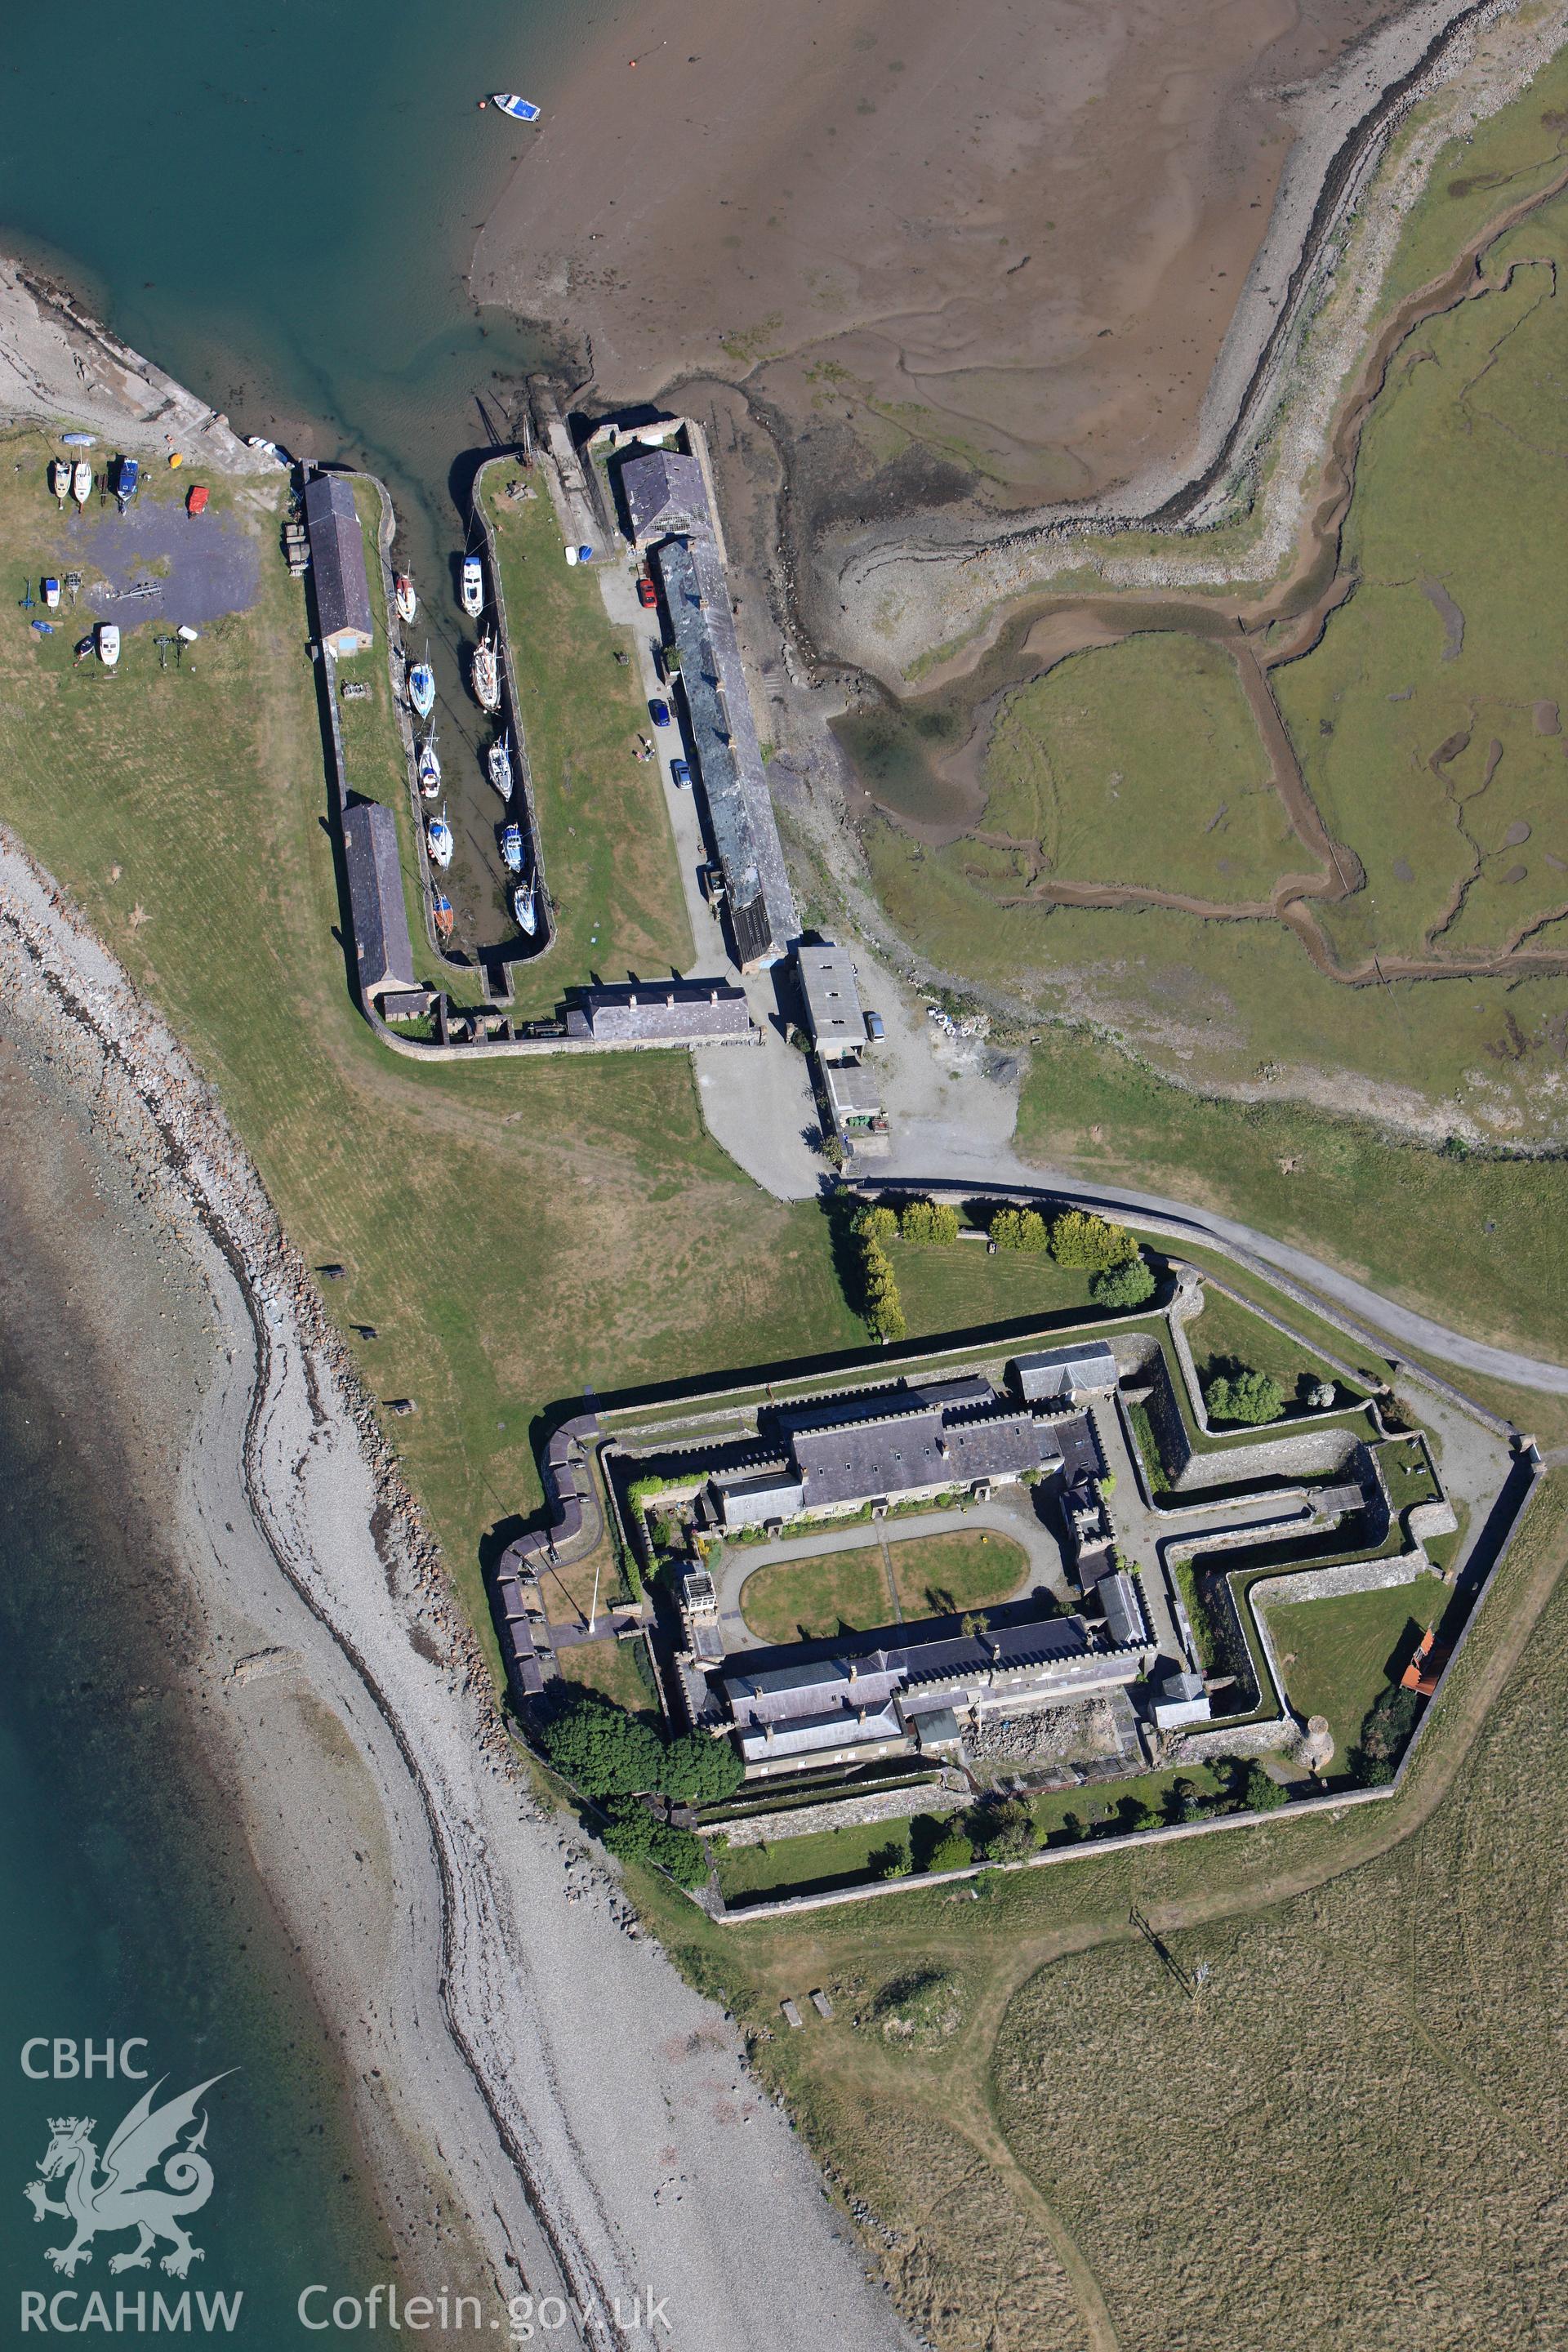 RCAHMW colour oblique photograph of Fort Belan and Fort Belan dockyard. Taken by Toby Driver on 16/06/2010.